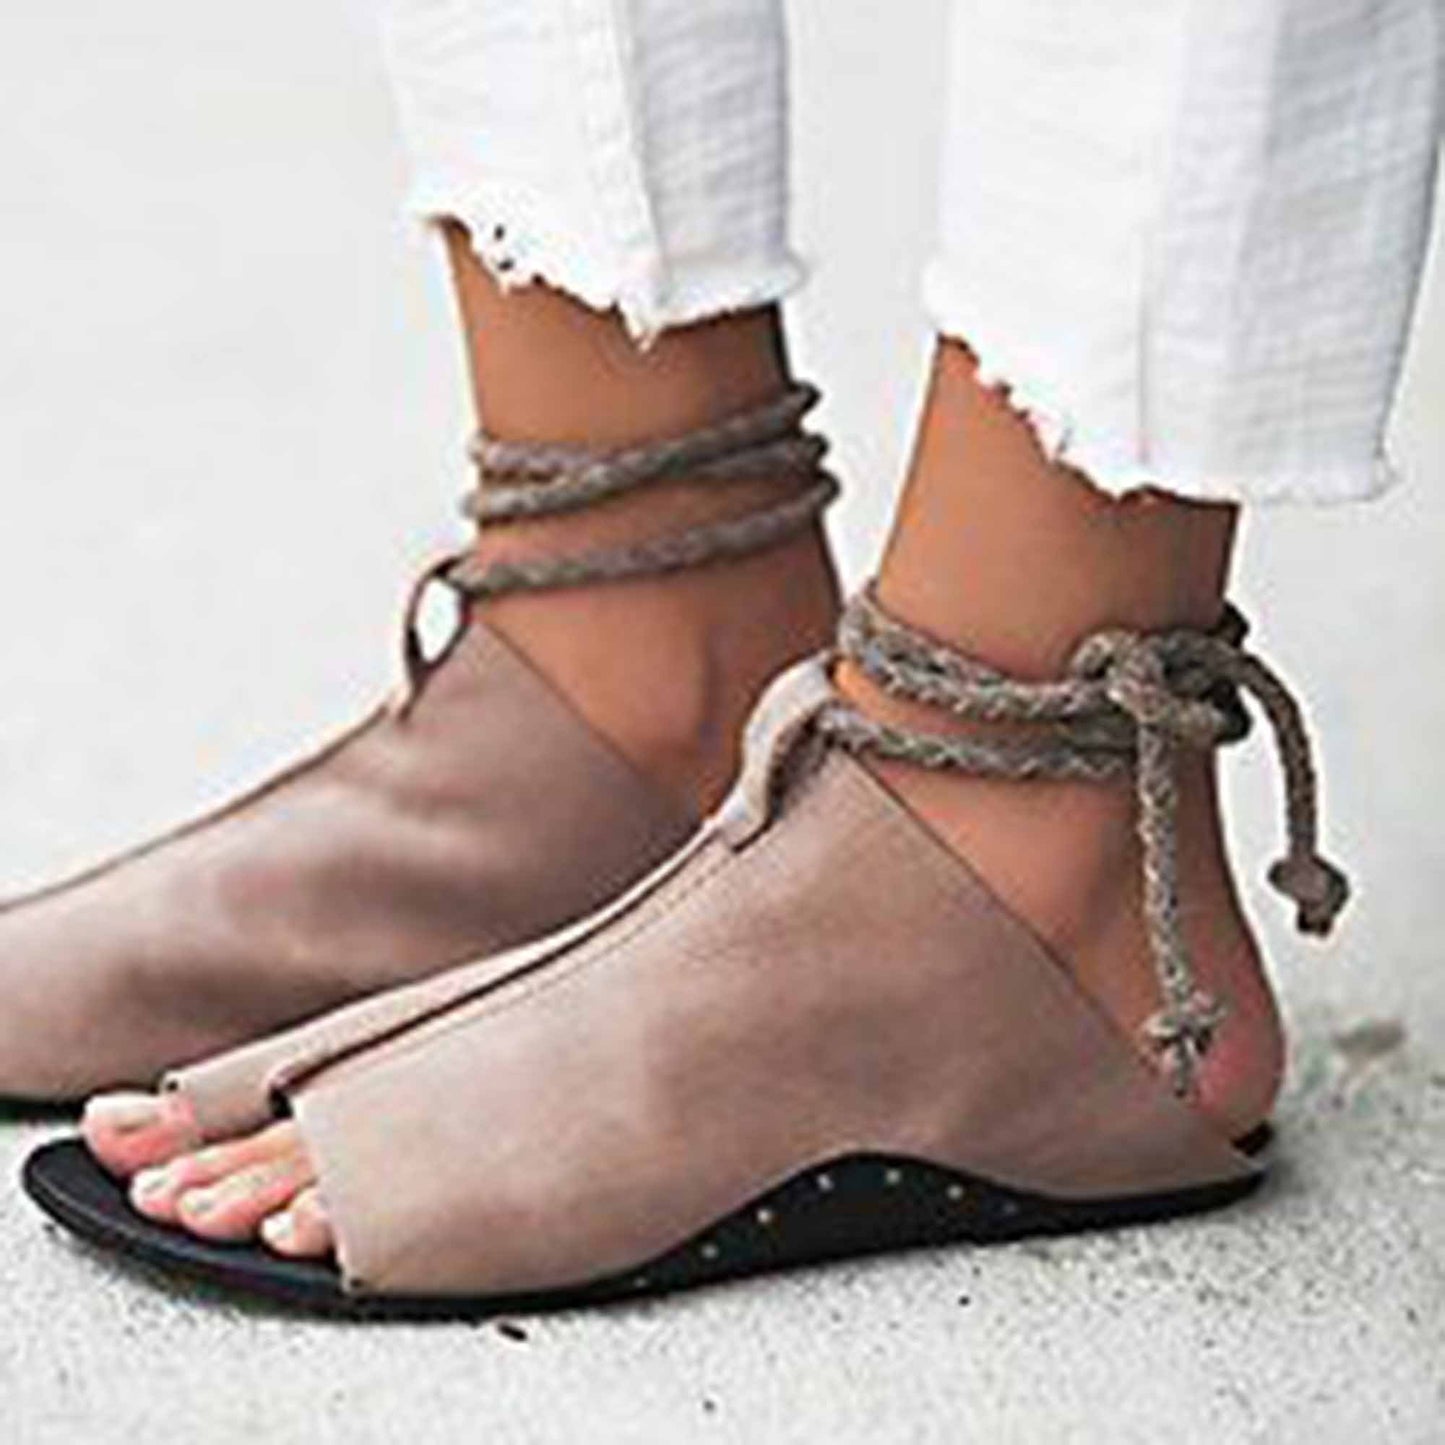 free people cherry valley leather tie wrap thong sandal - size 37